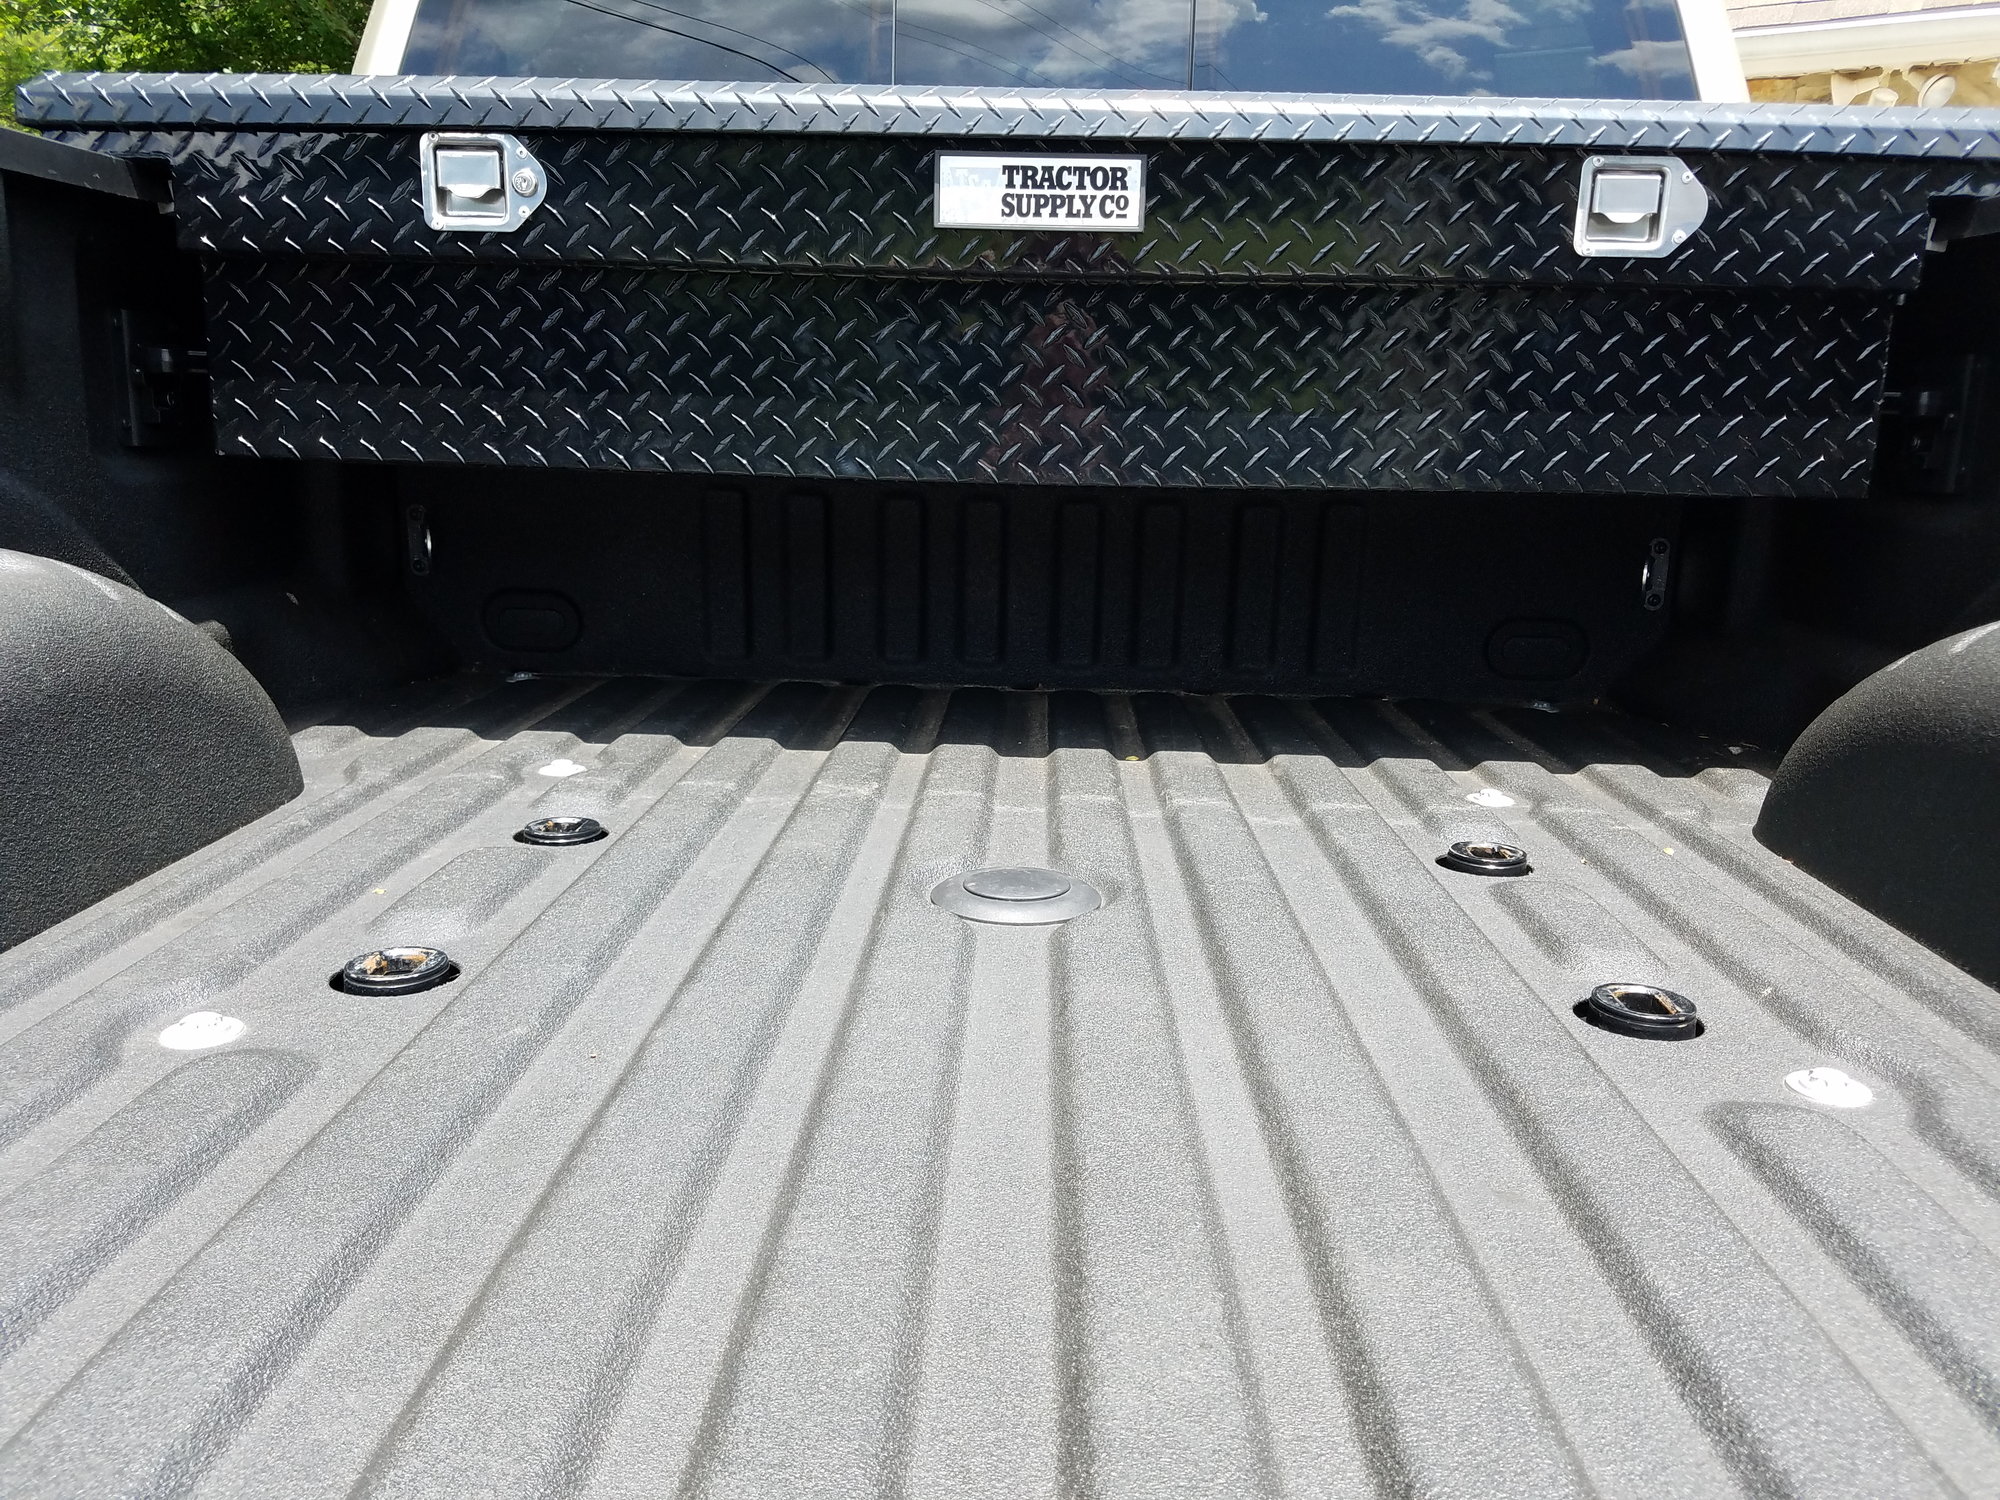 2017 F250 5th wheel hitch prep package - Ford Truck Enthusiasts Forums 2017 F250 5th Wheel Prep Package